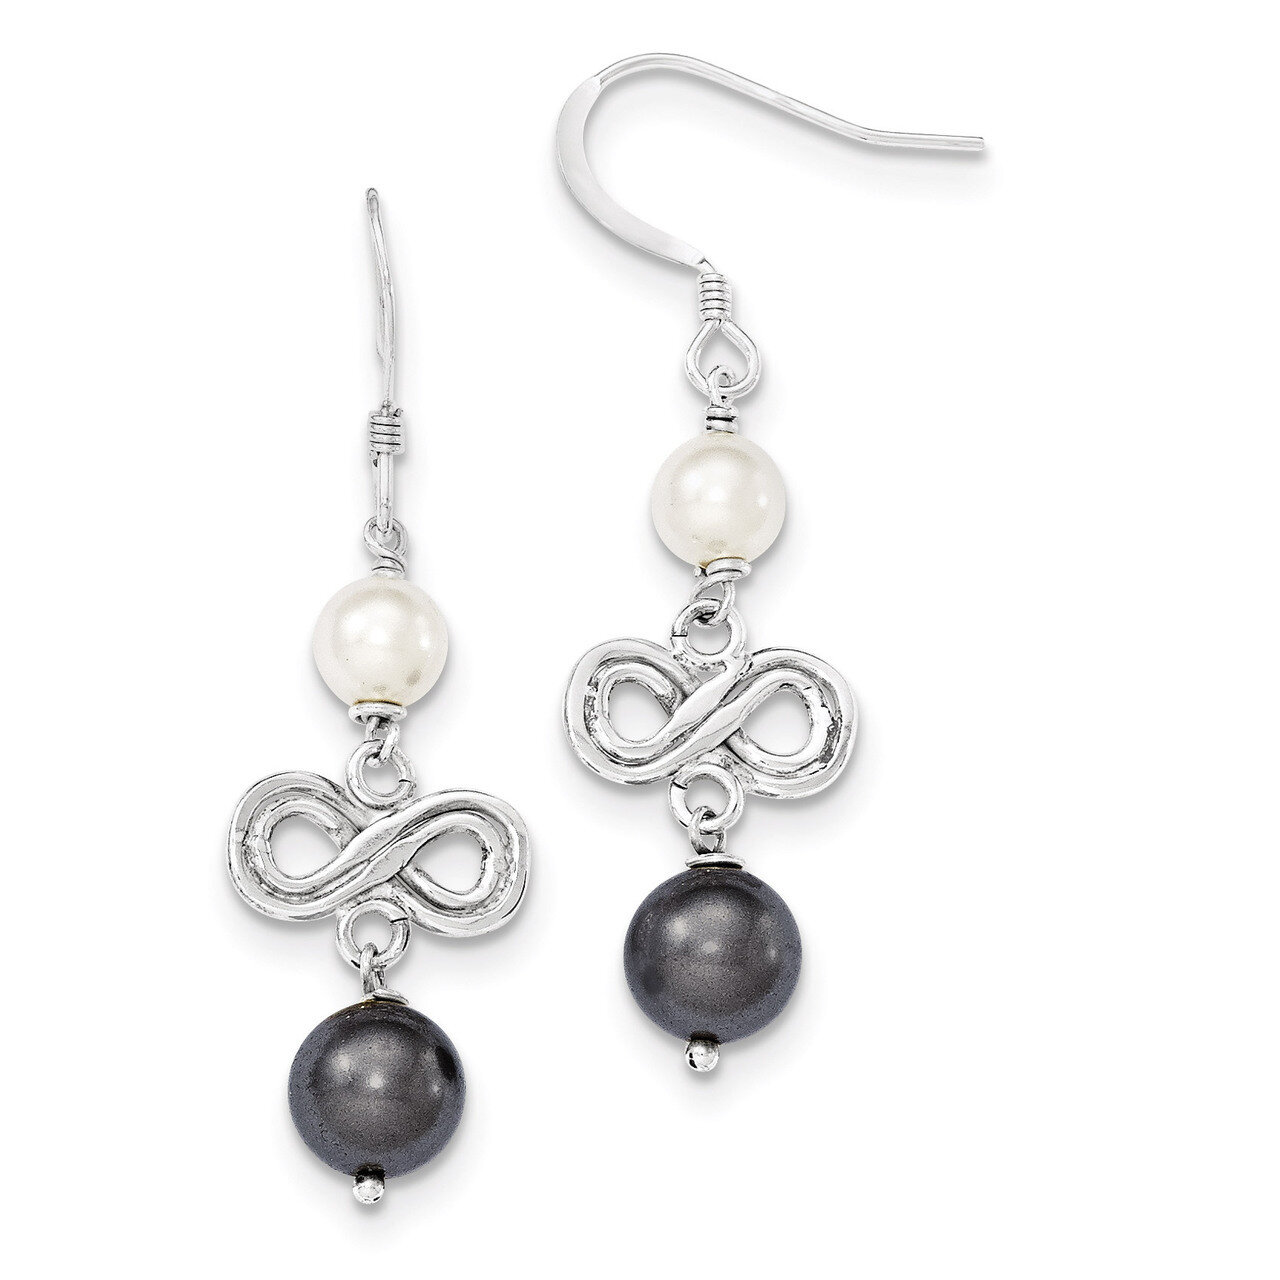 Dark Grey and White Swarovski Cultured Pearl Earrings Sterling Silver QE5083